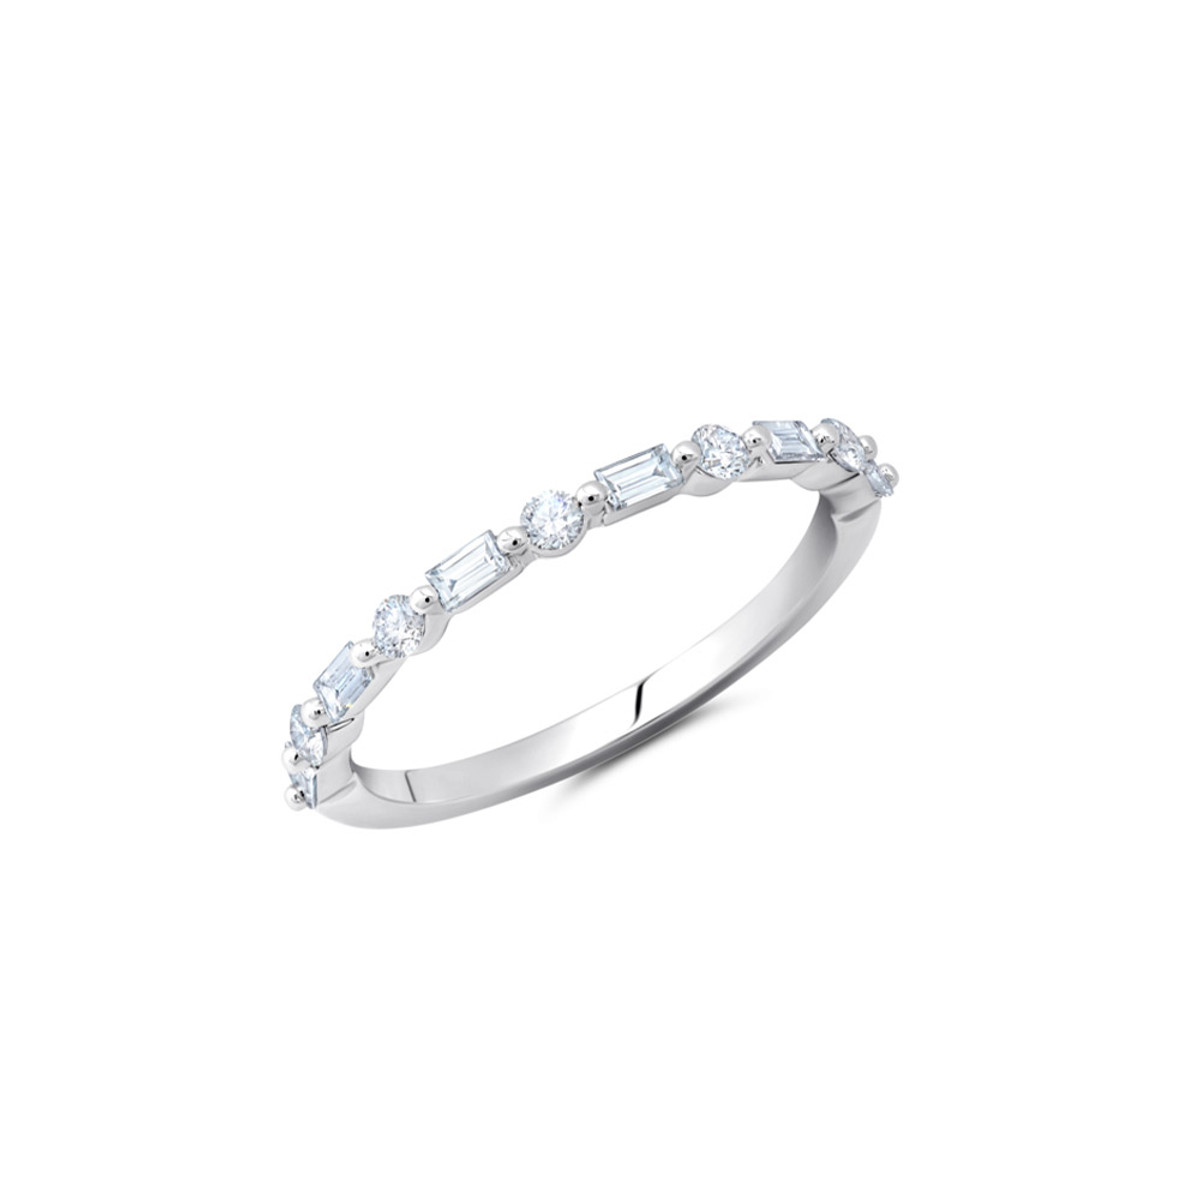 Peter Storm 14K White Gold Round and Baguette Diamond Band-39061 Product Image